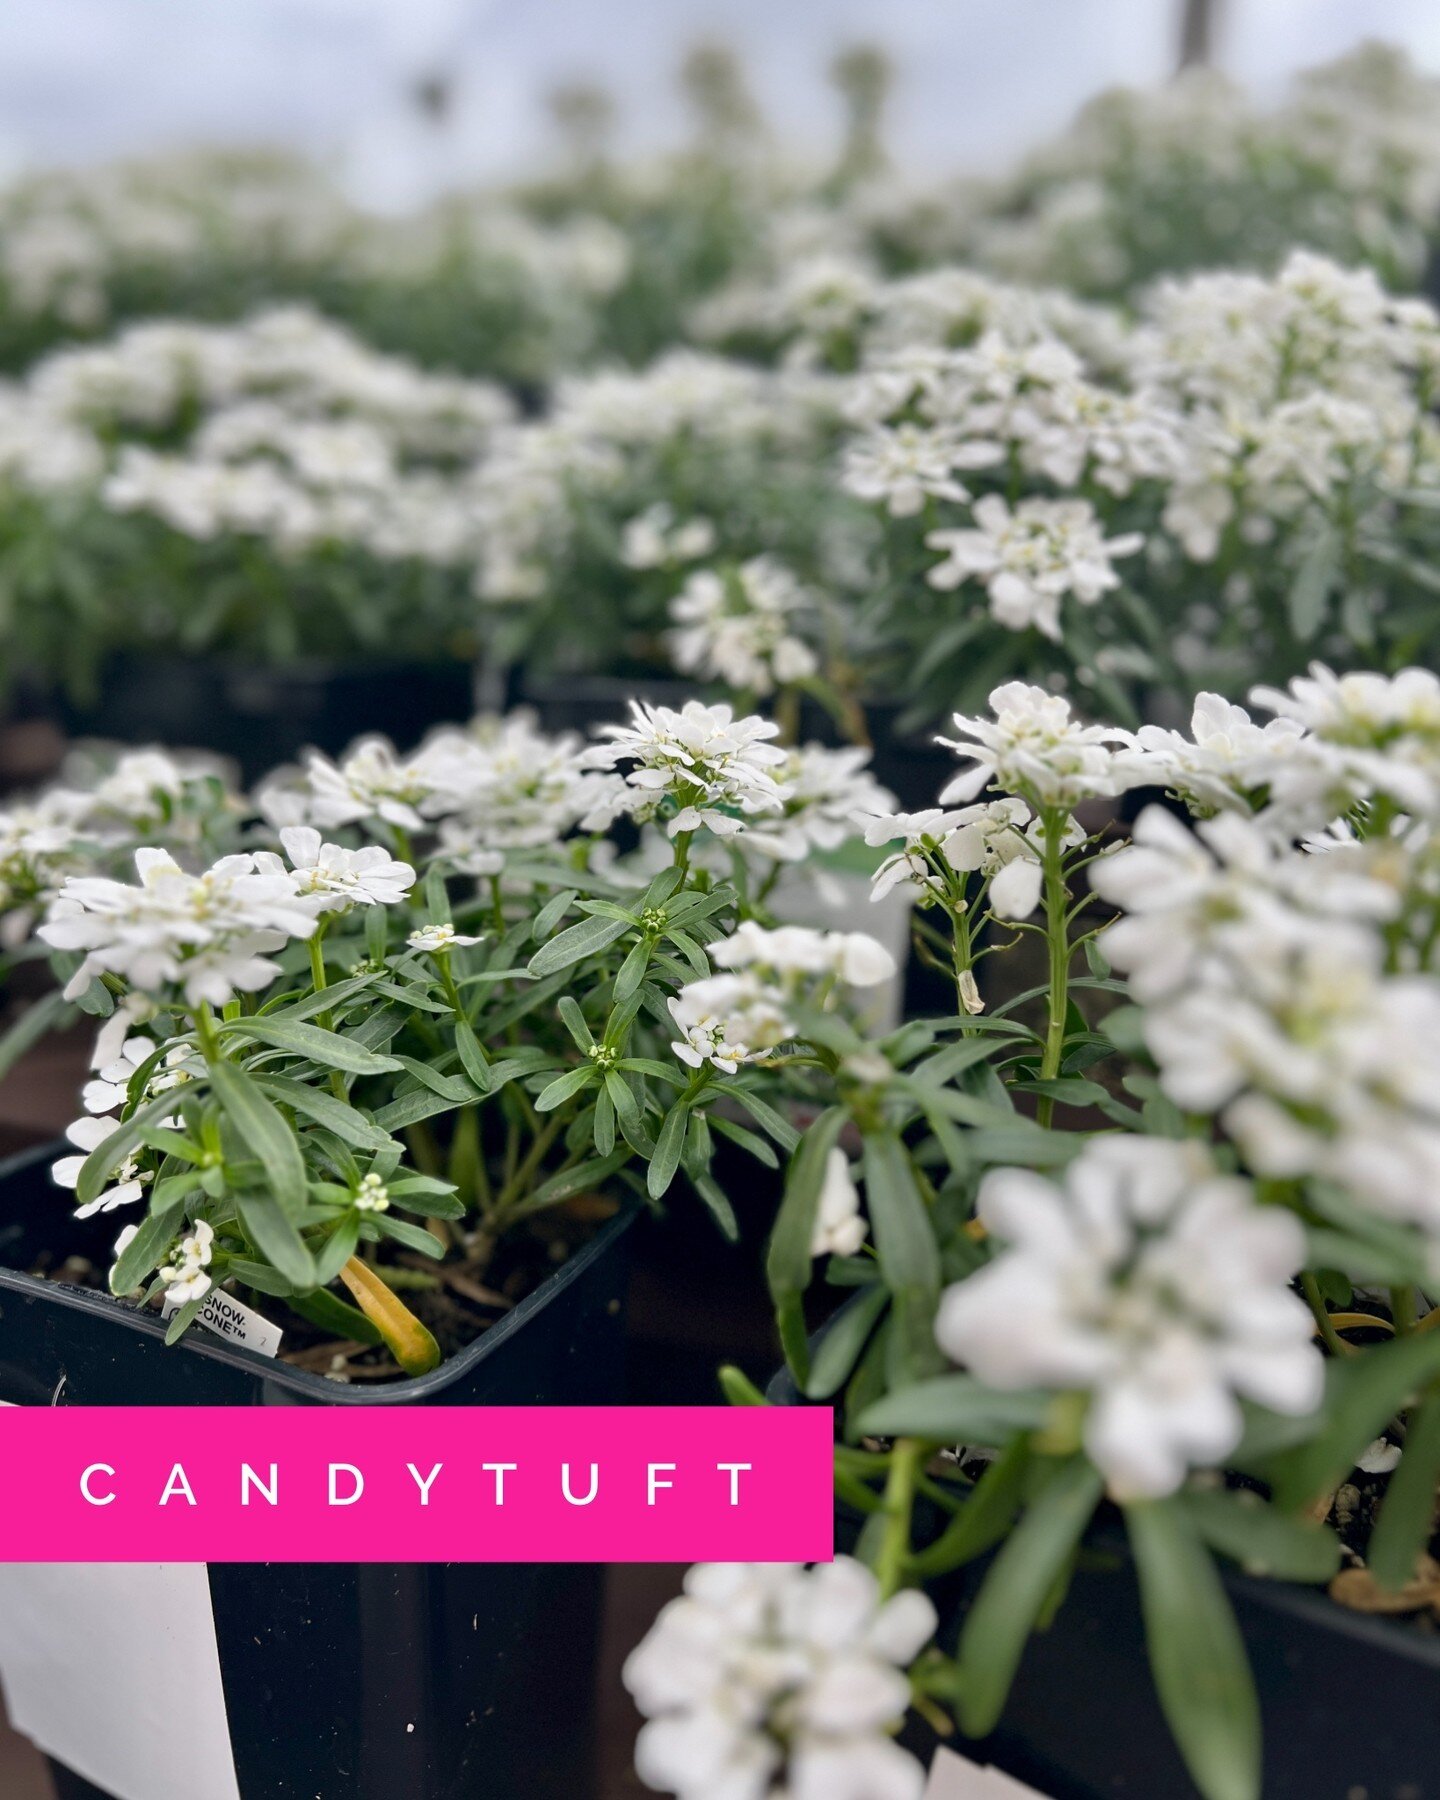 Besides basic maintenance &amp; pruning roses, this season is a good time for planning &amp; planting your spring garden! 🌼 Here are a few ideas:⁠
⁠
🌸 Candytuft: low growing with bunches of small white flowers with yellow centers. Plant this in ful